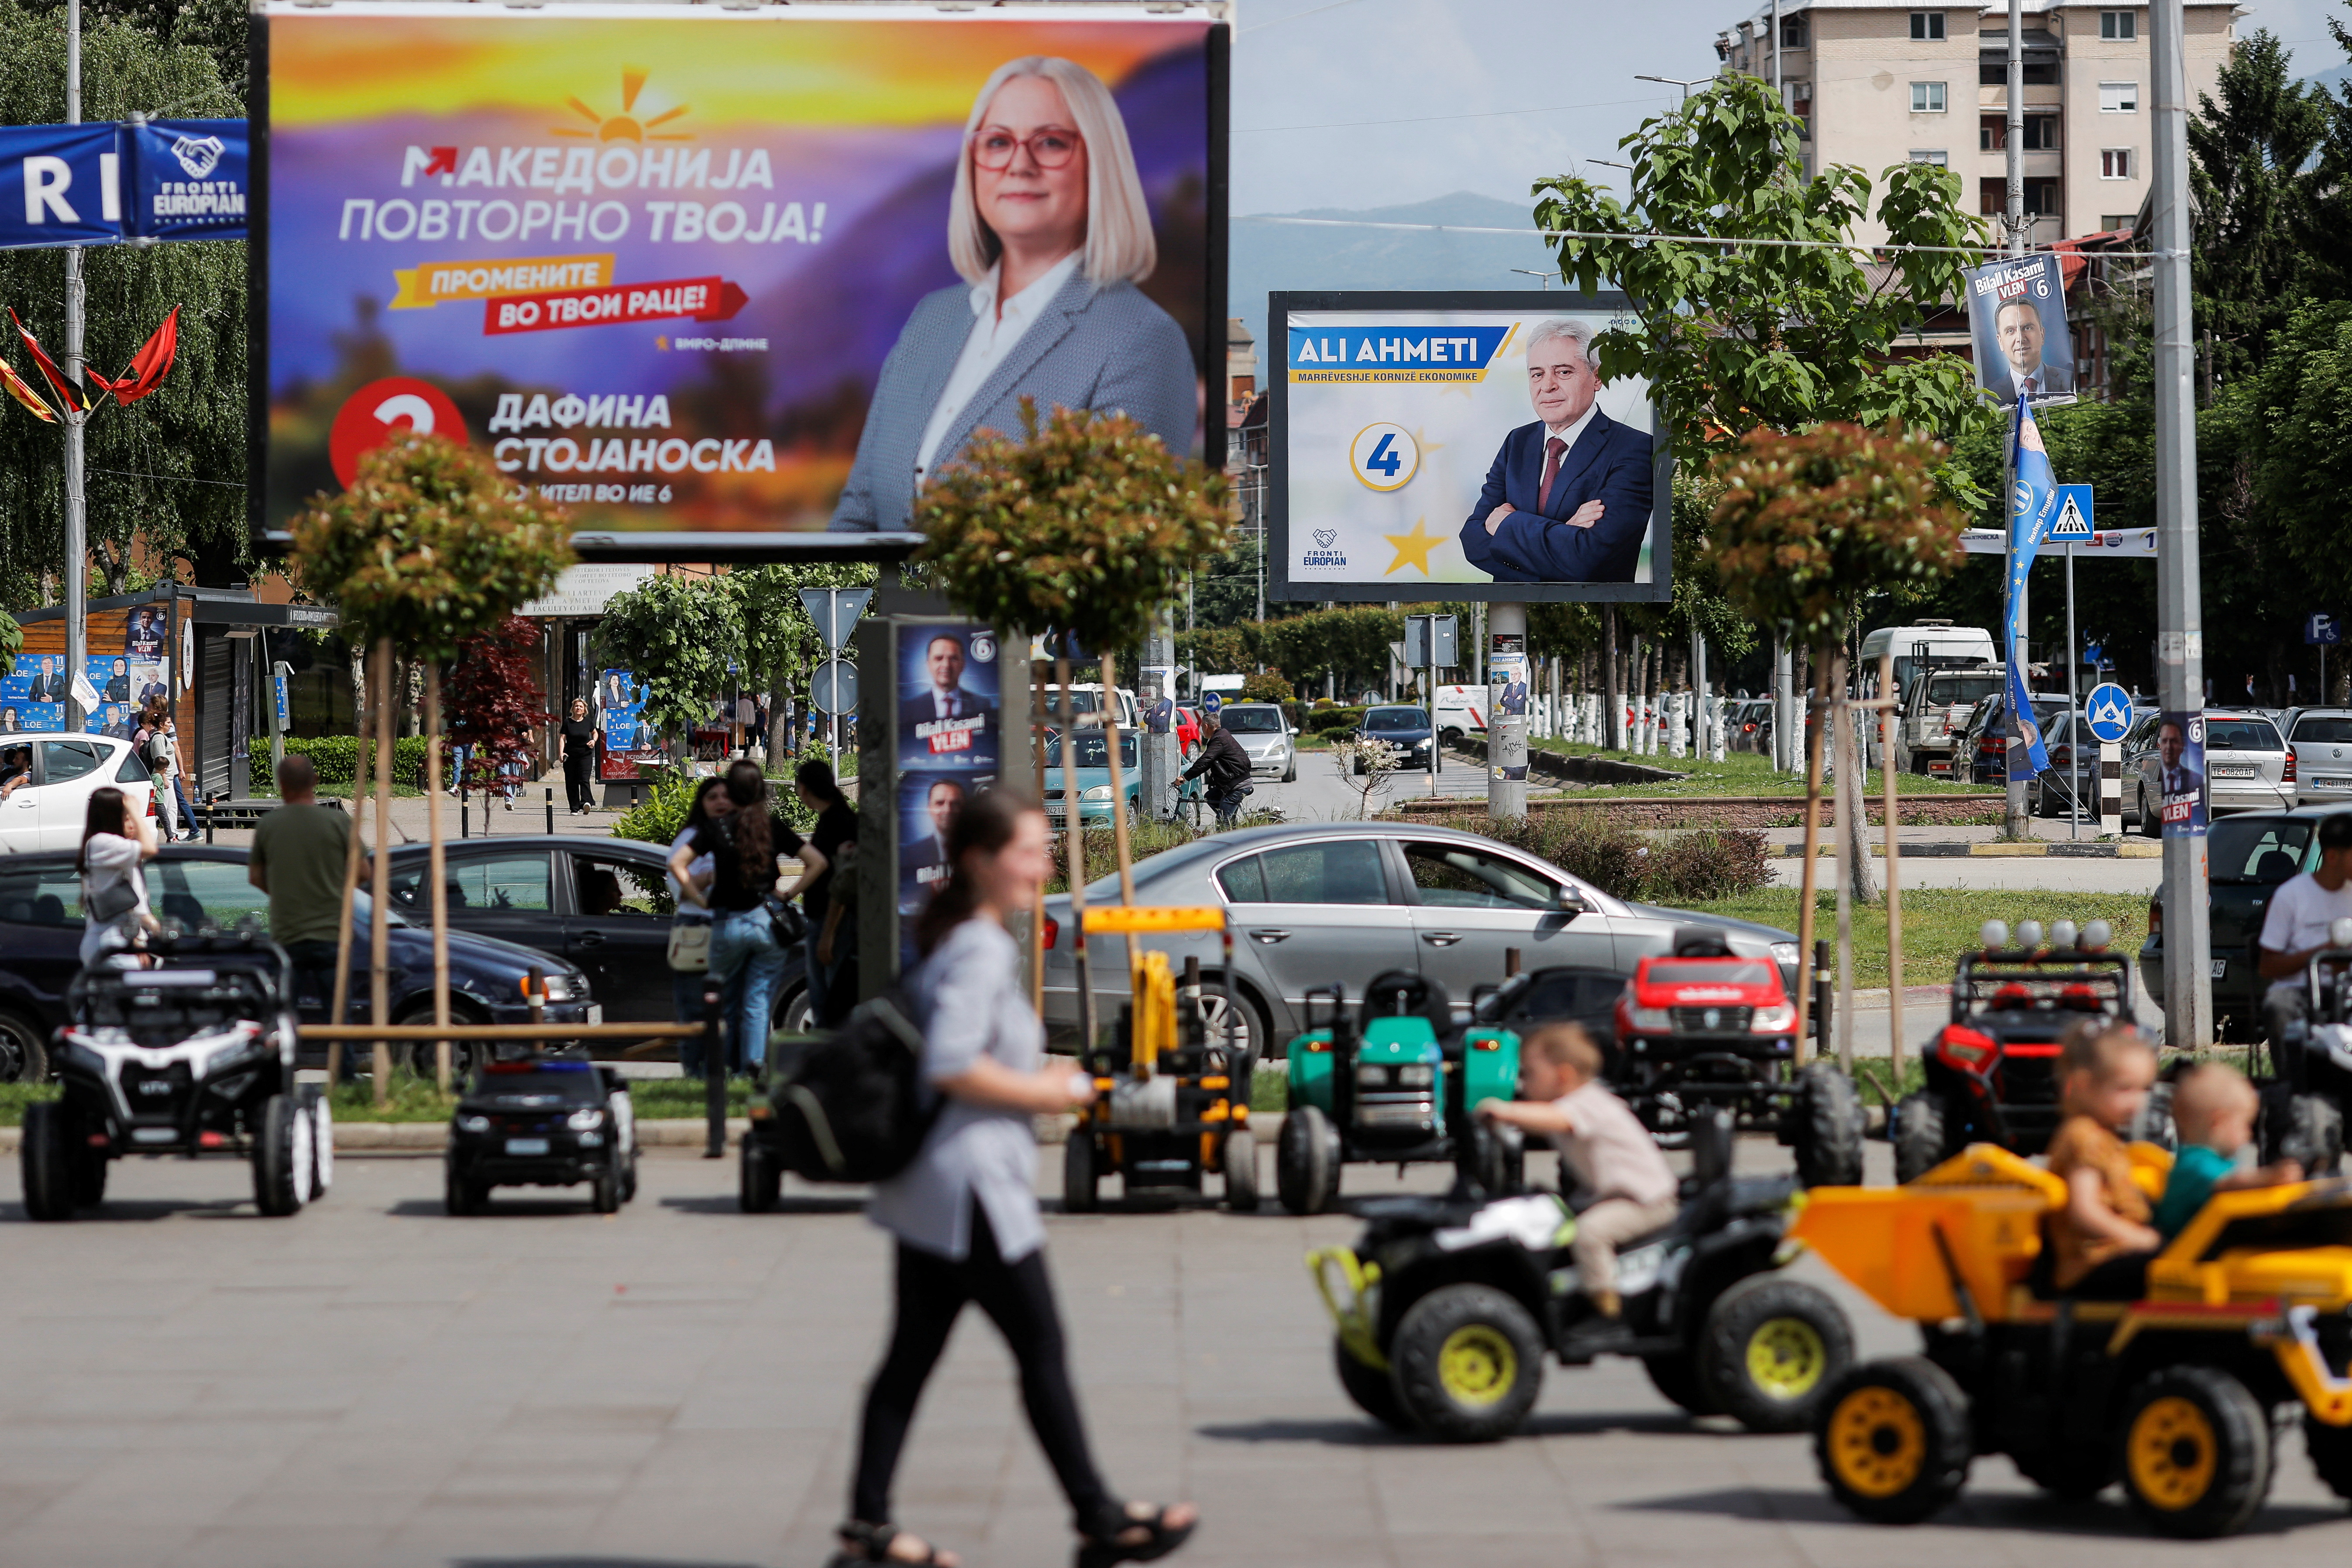 Children play near campaign billboards for the upcoming parliamentary and presidential elections, in Tetovo